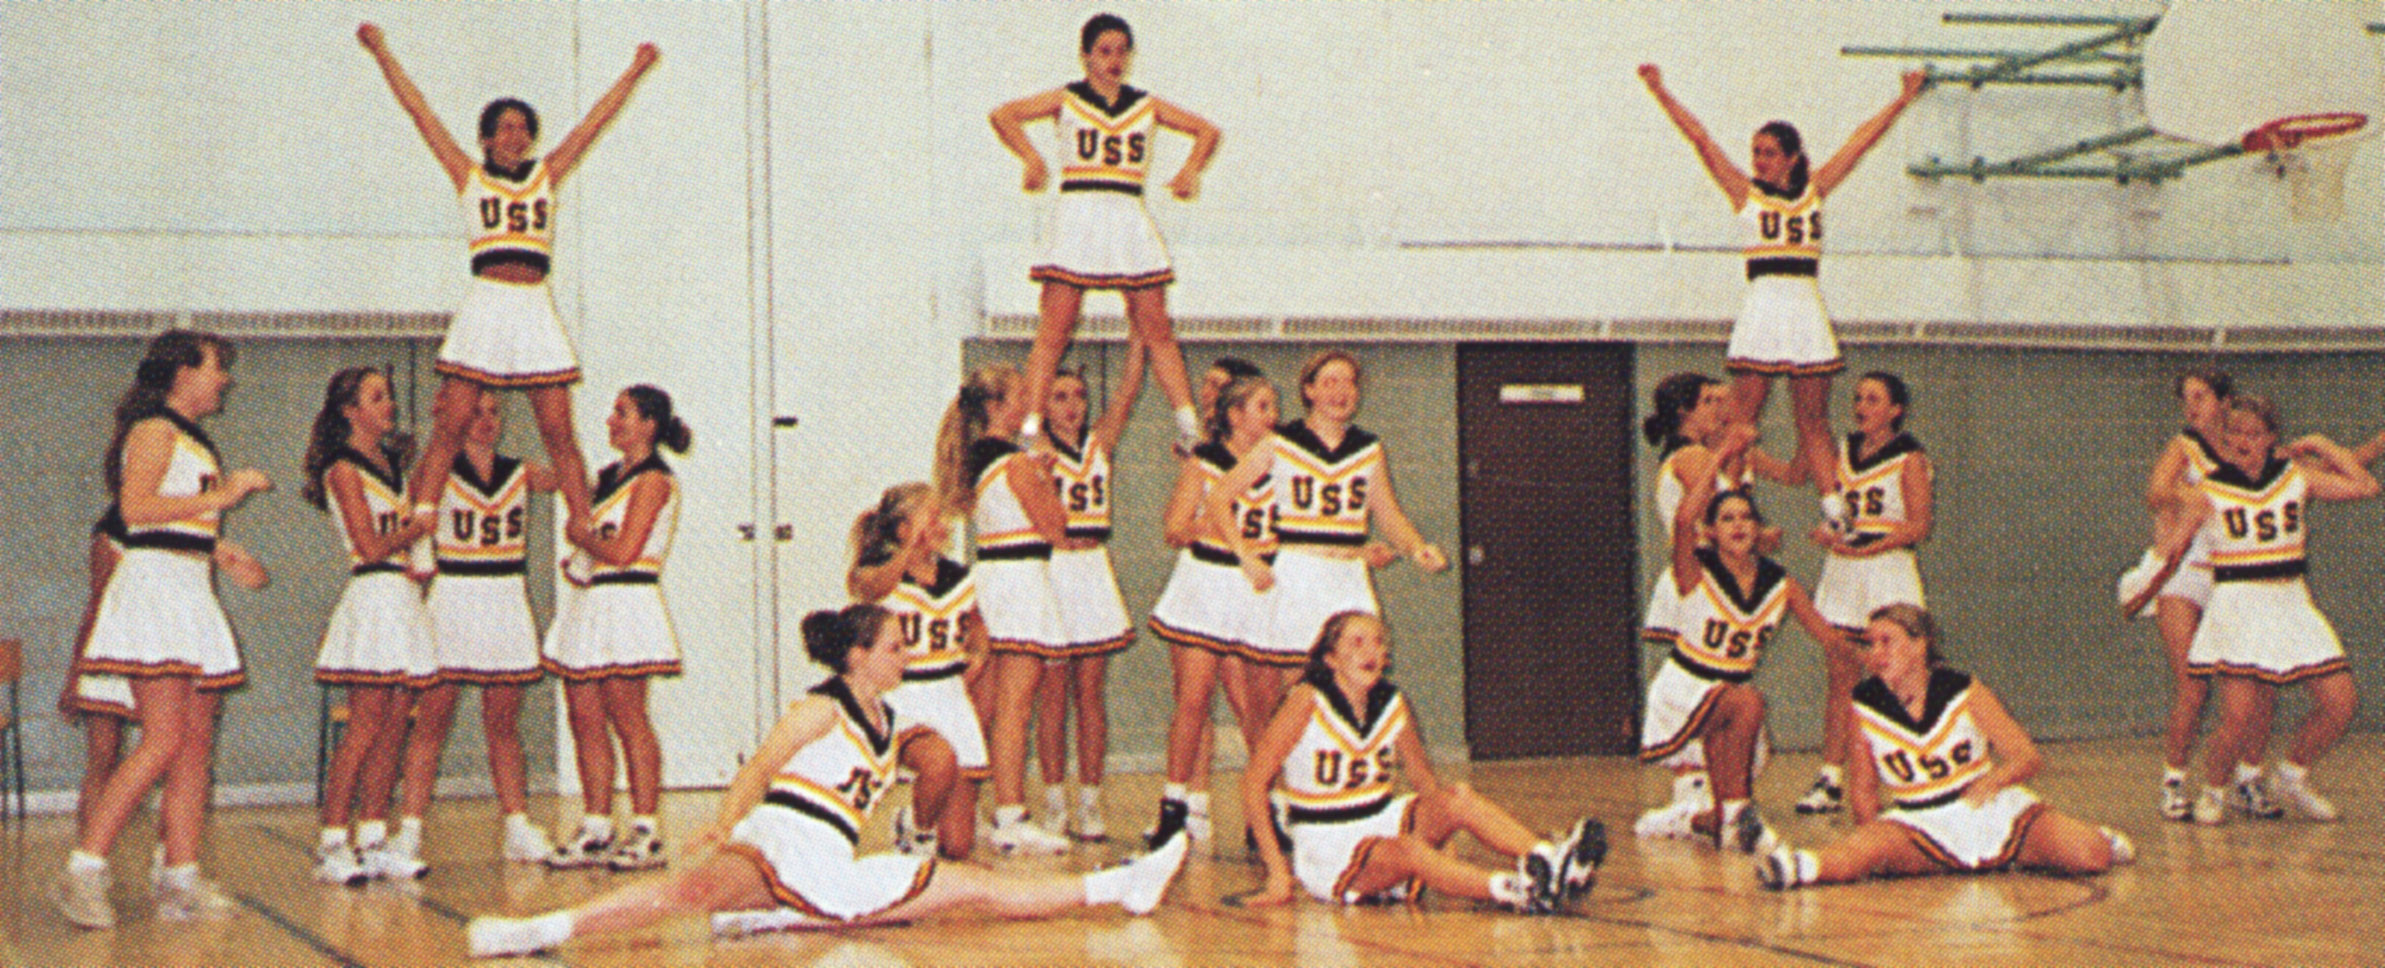 (Click to magnify - however, the original image was small) Power Cheerleaders 1996-97